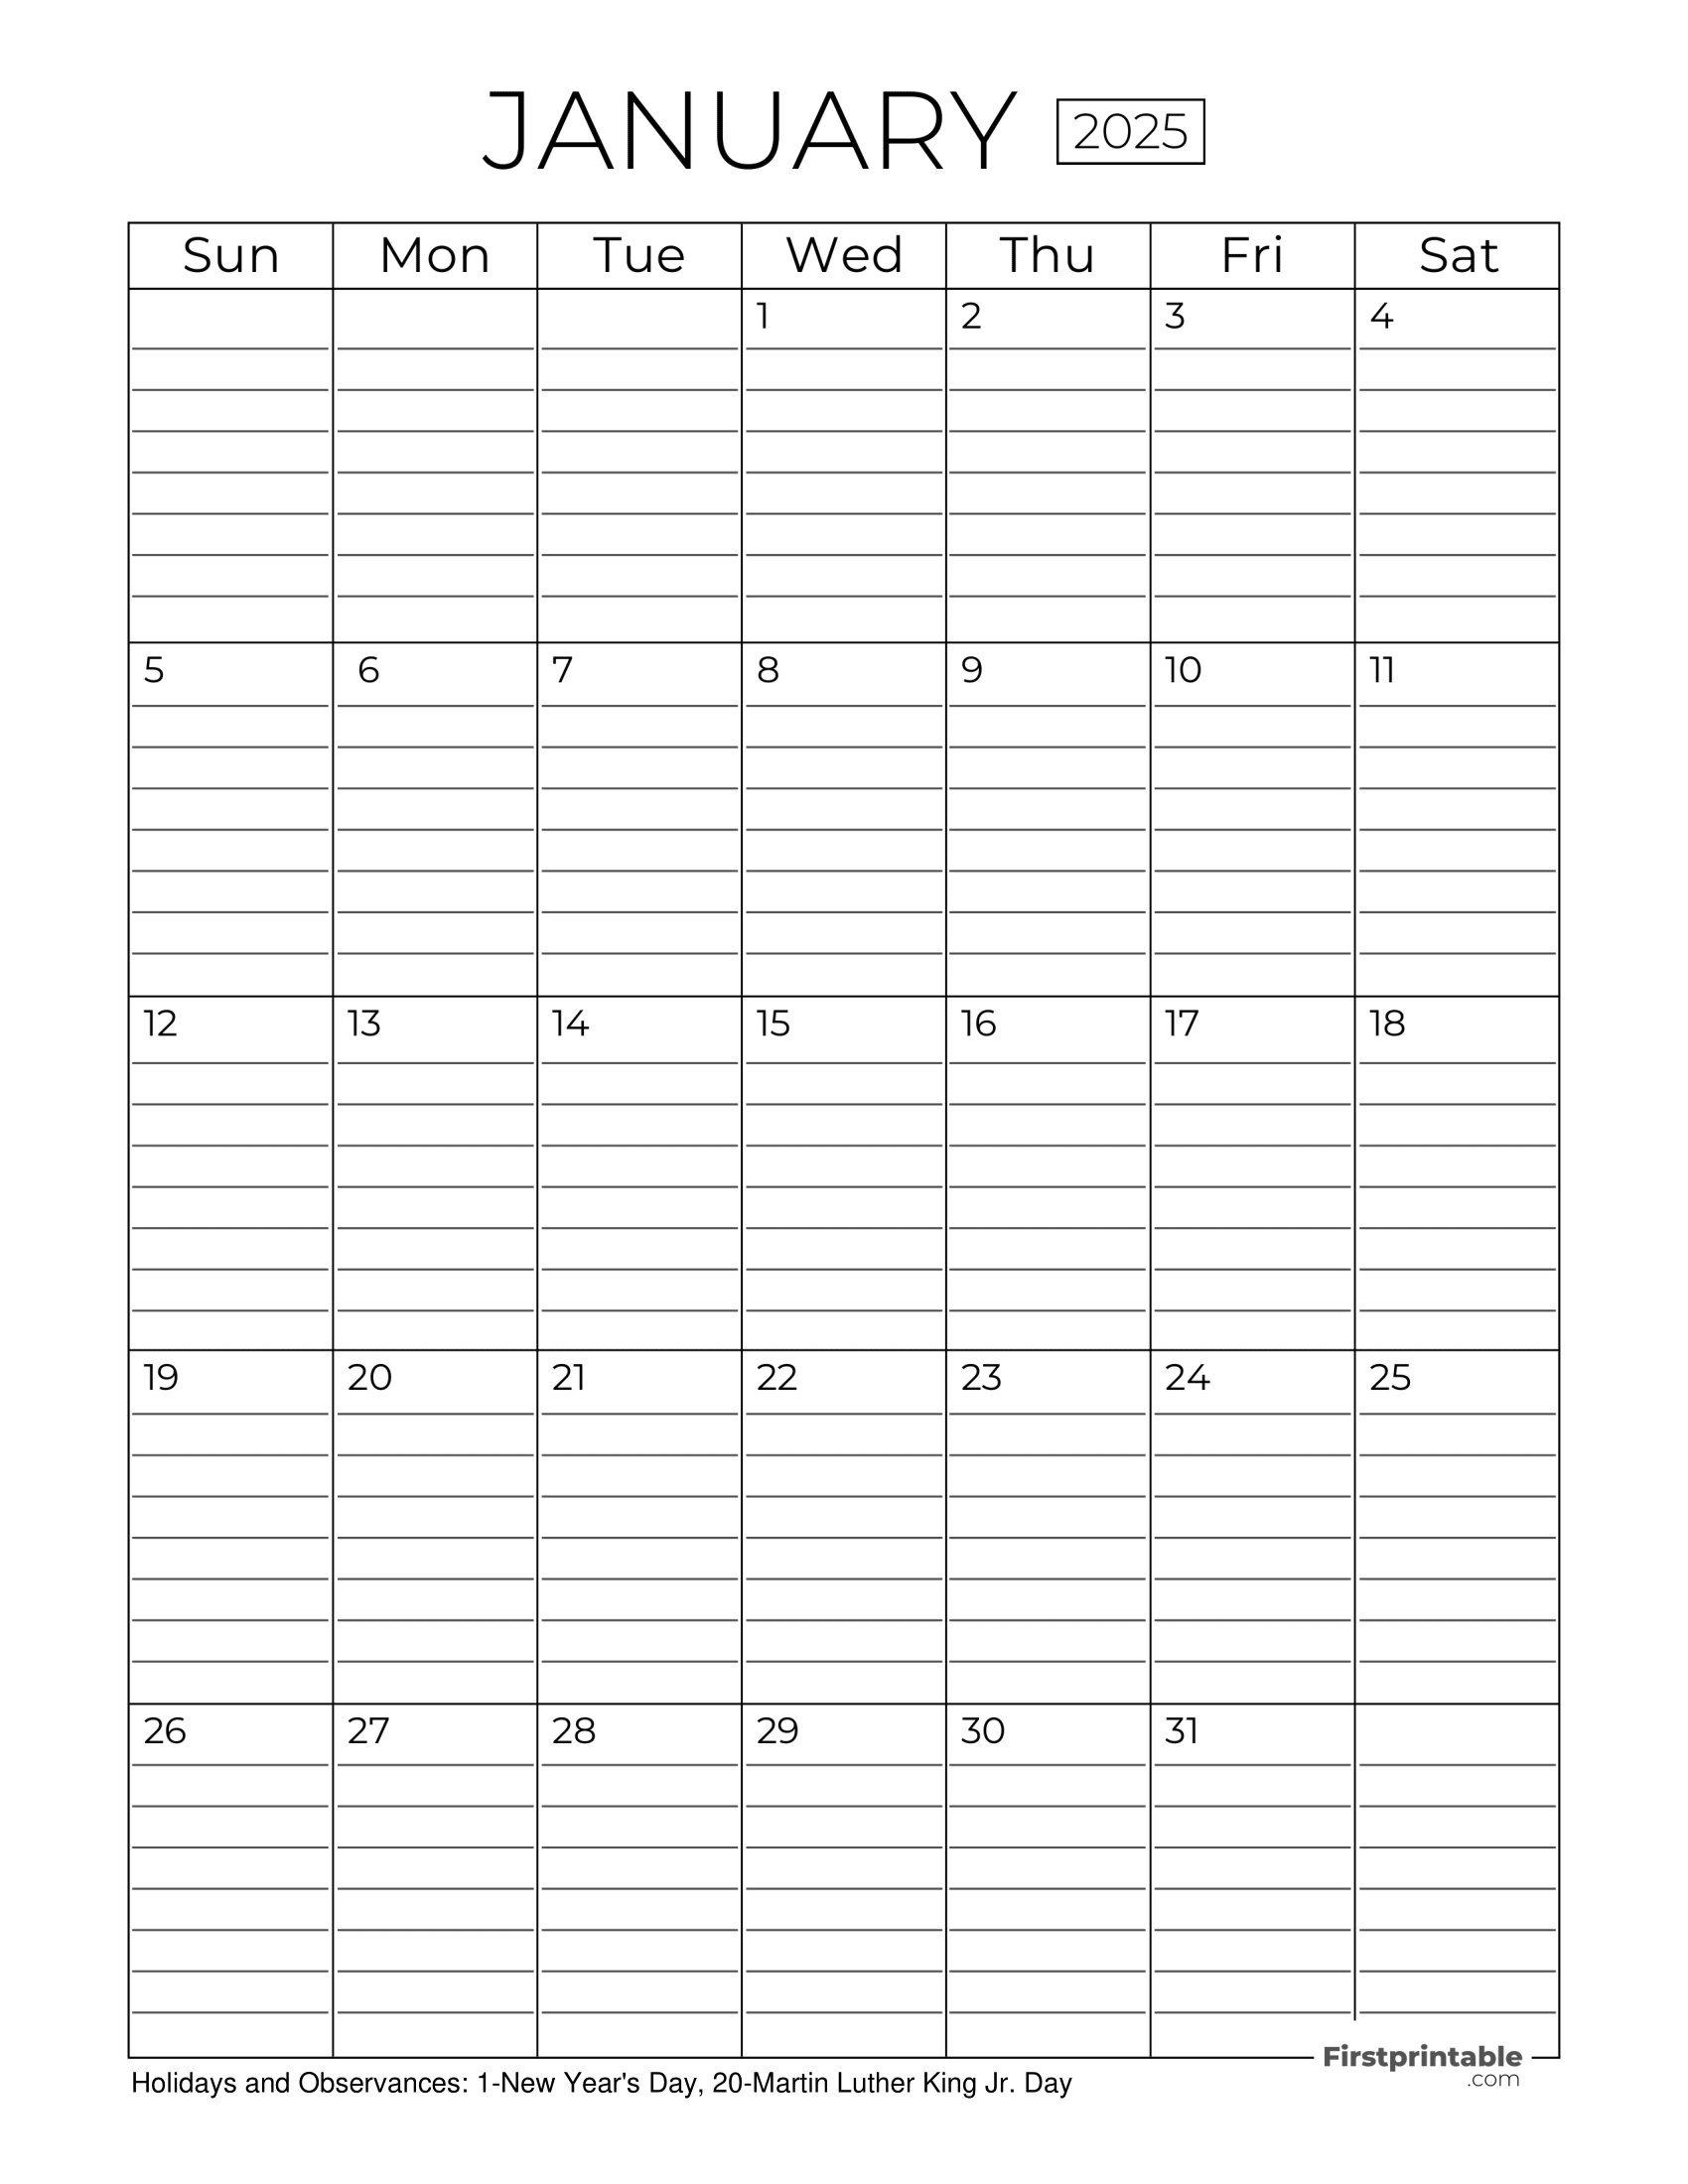 January Calendar 2025 with Lines